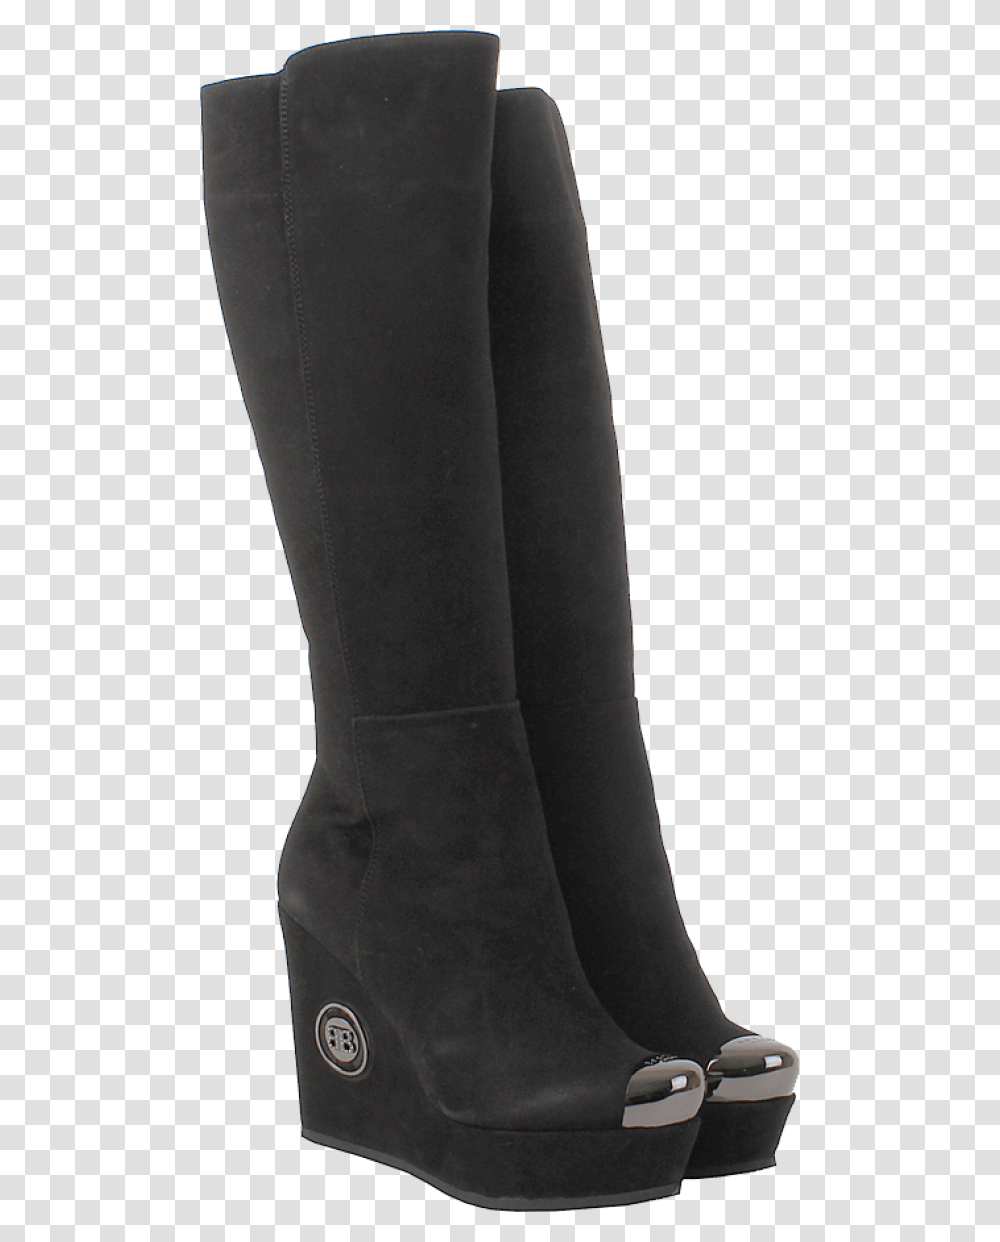 Free Boots Heels Black Ladies Boots On Background, Apparel, Footwear, Riding Boot Transparent Png